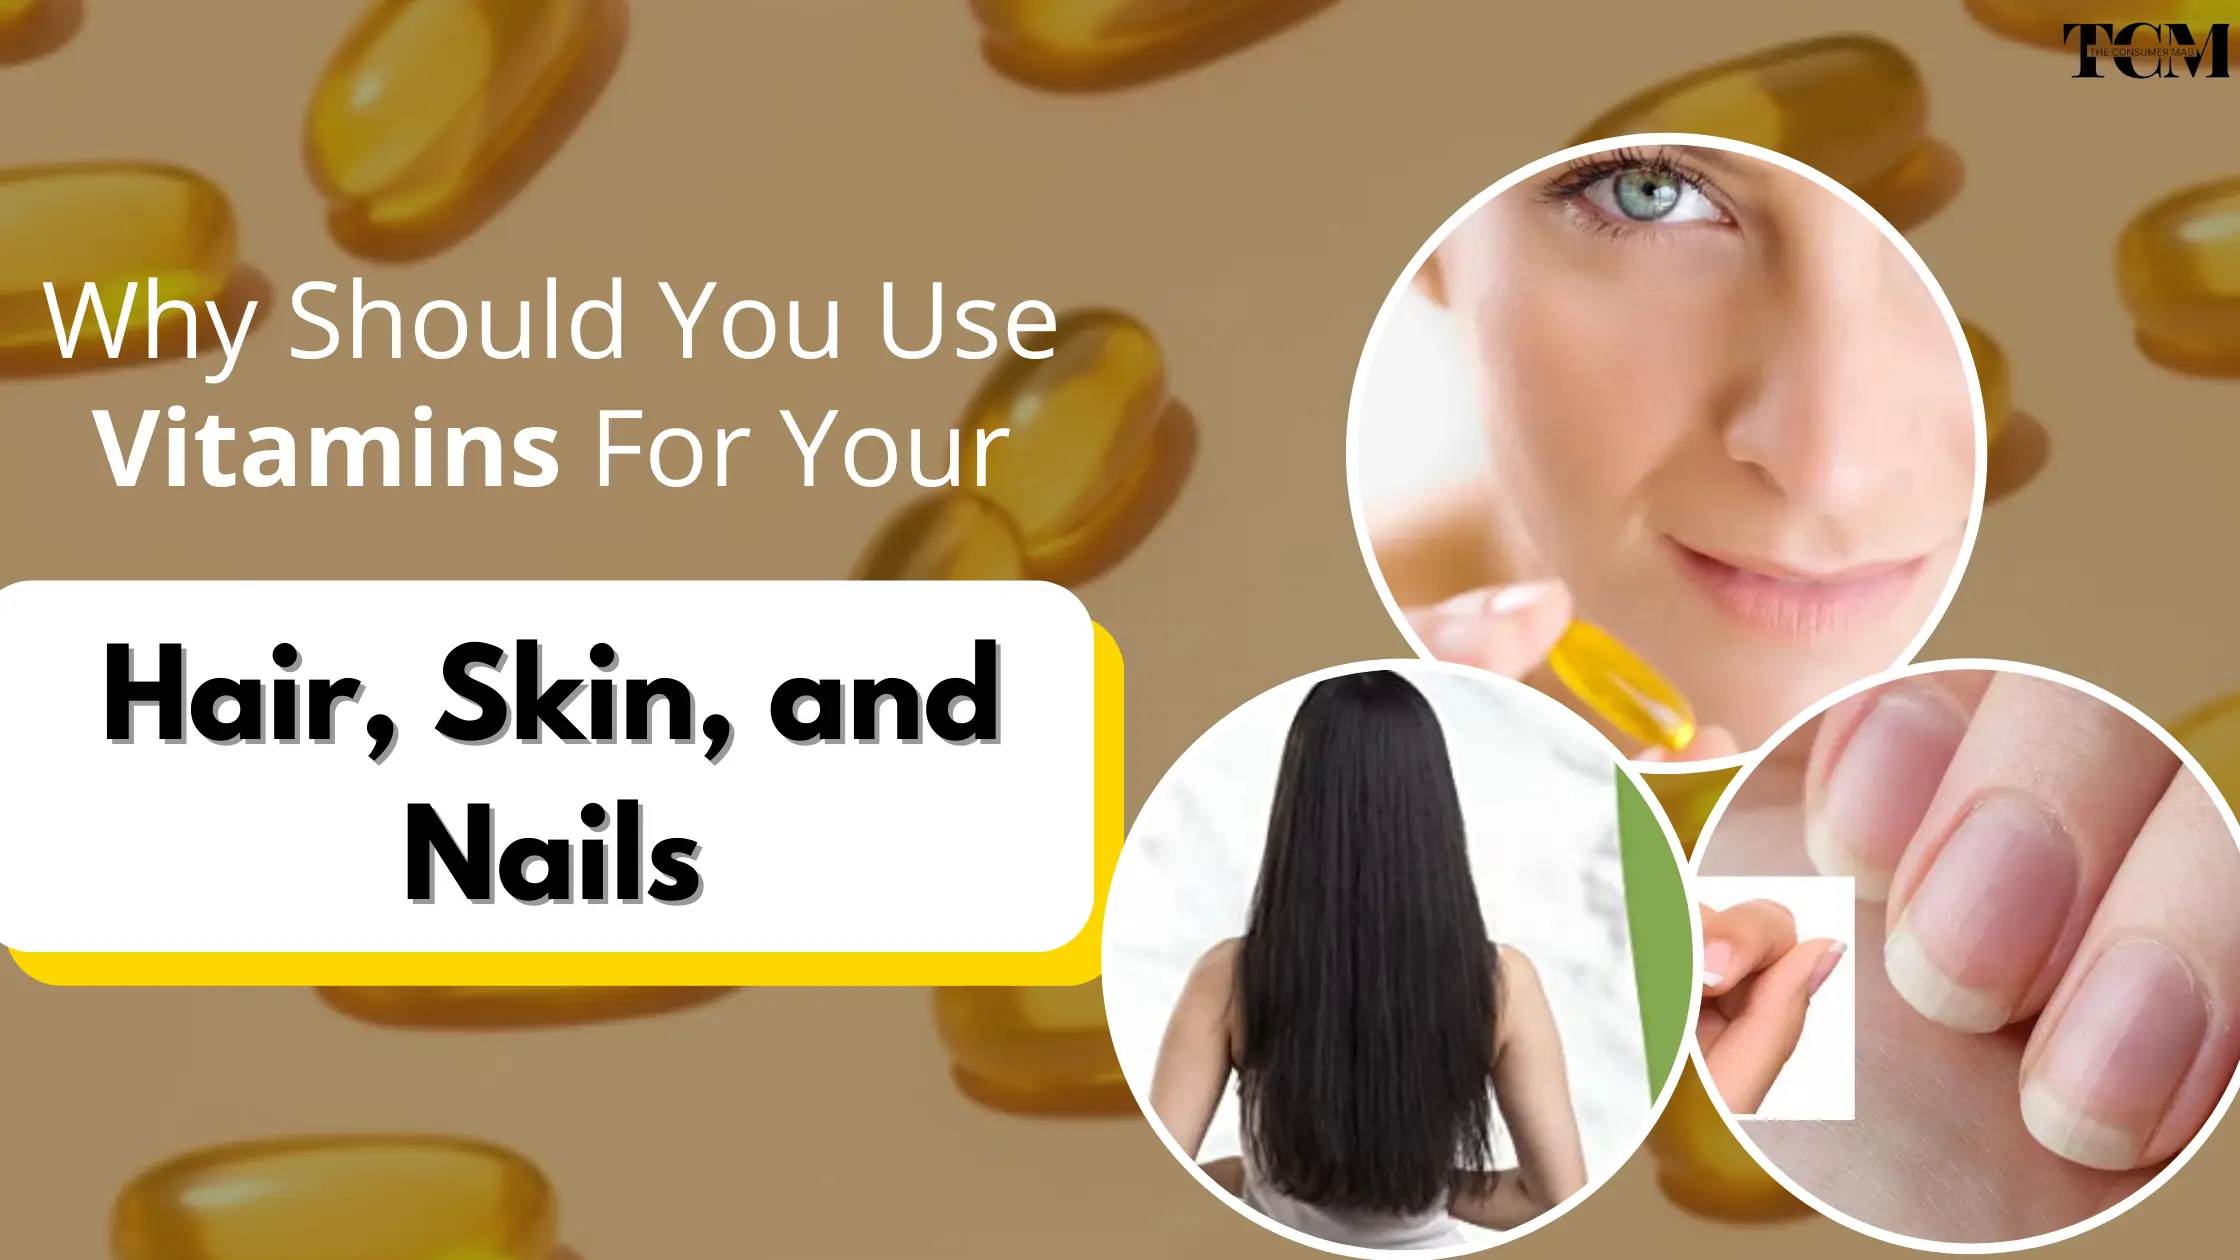 Why Should You Use Vitamins For Your Nails, Skin, and Hair?